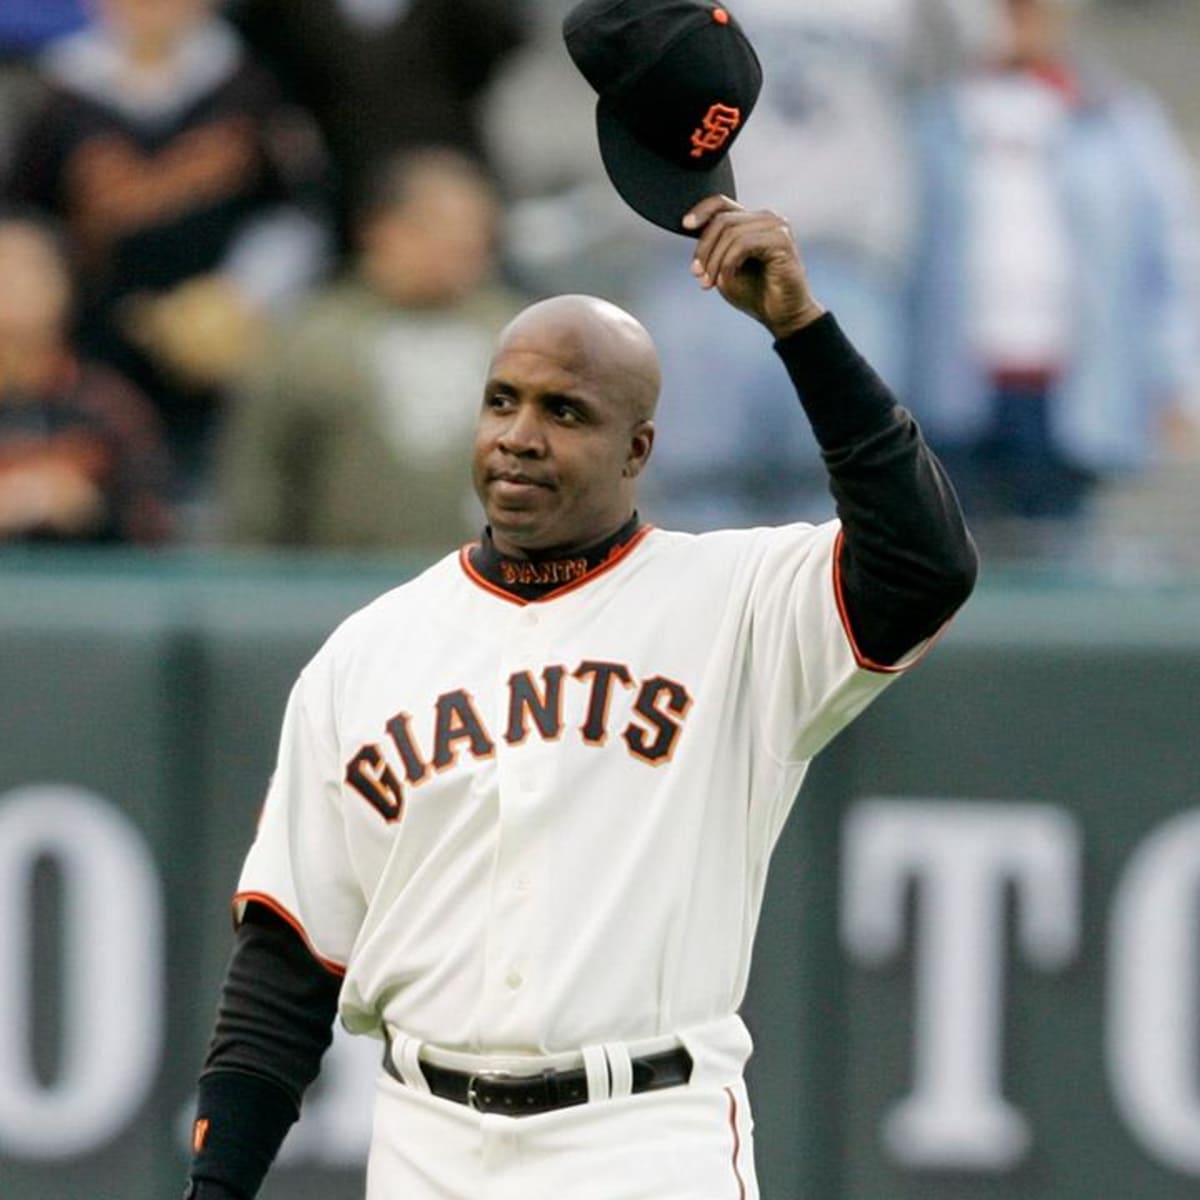 Barry Bonds record breaking HR number 756 👑👑👑 #mlb